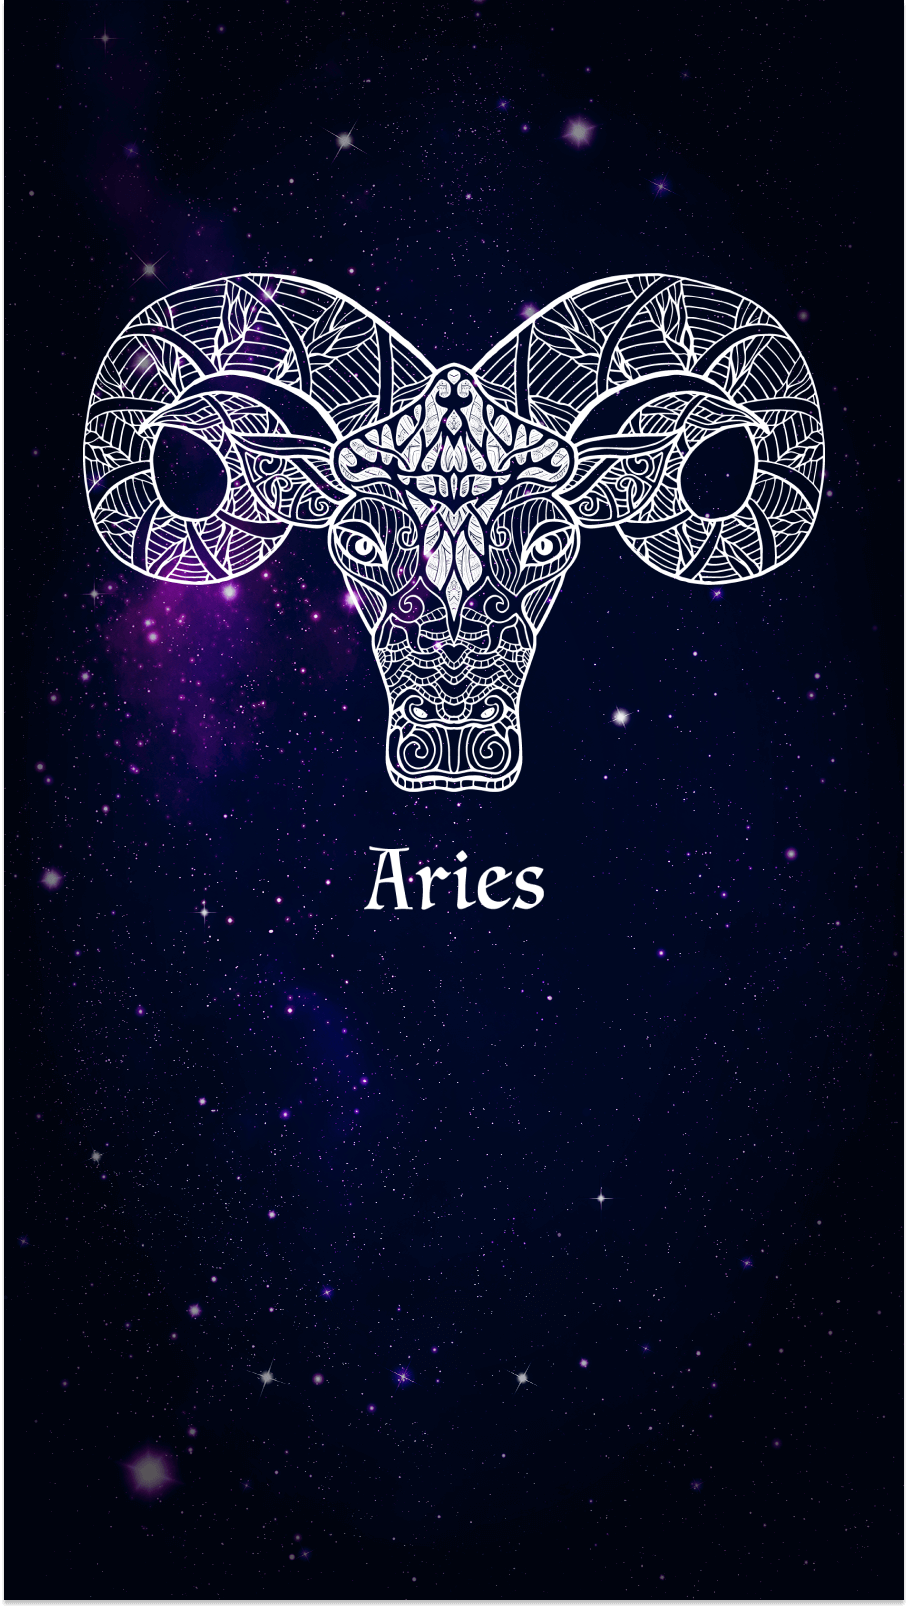 Aries wallpaper for your android mobile Free horoscope